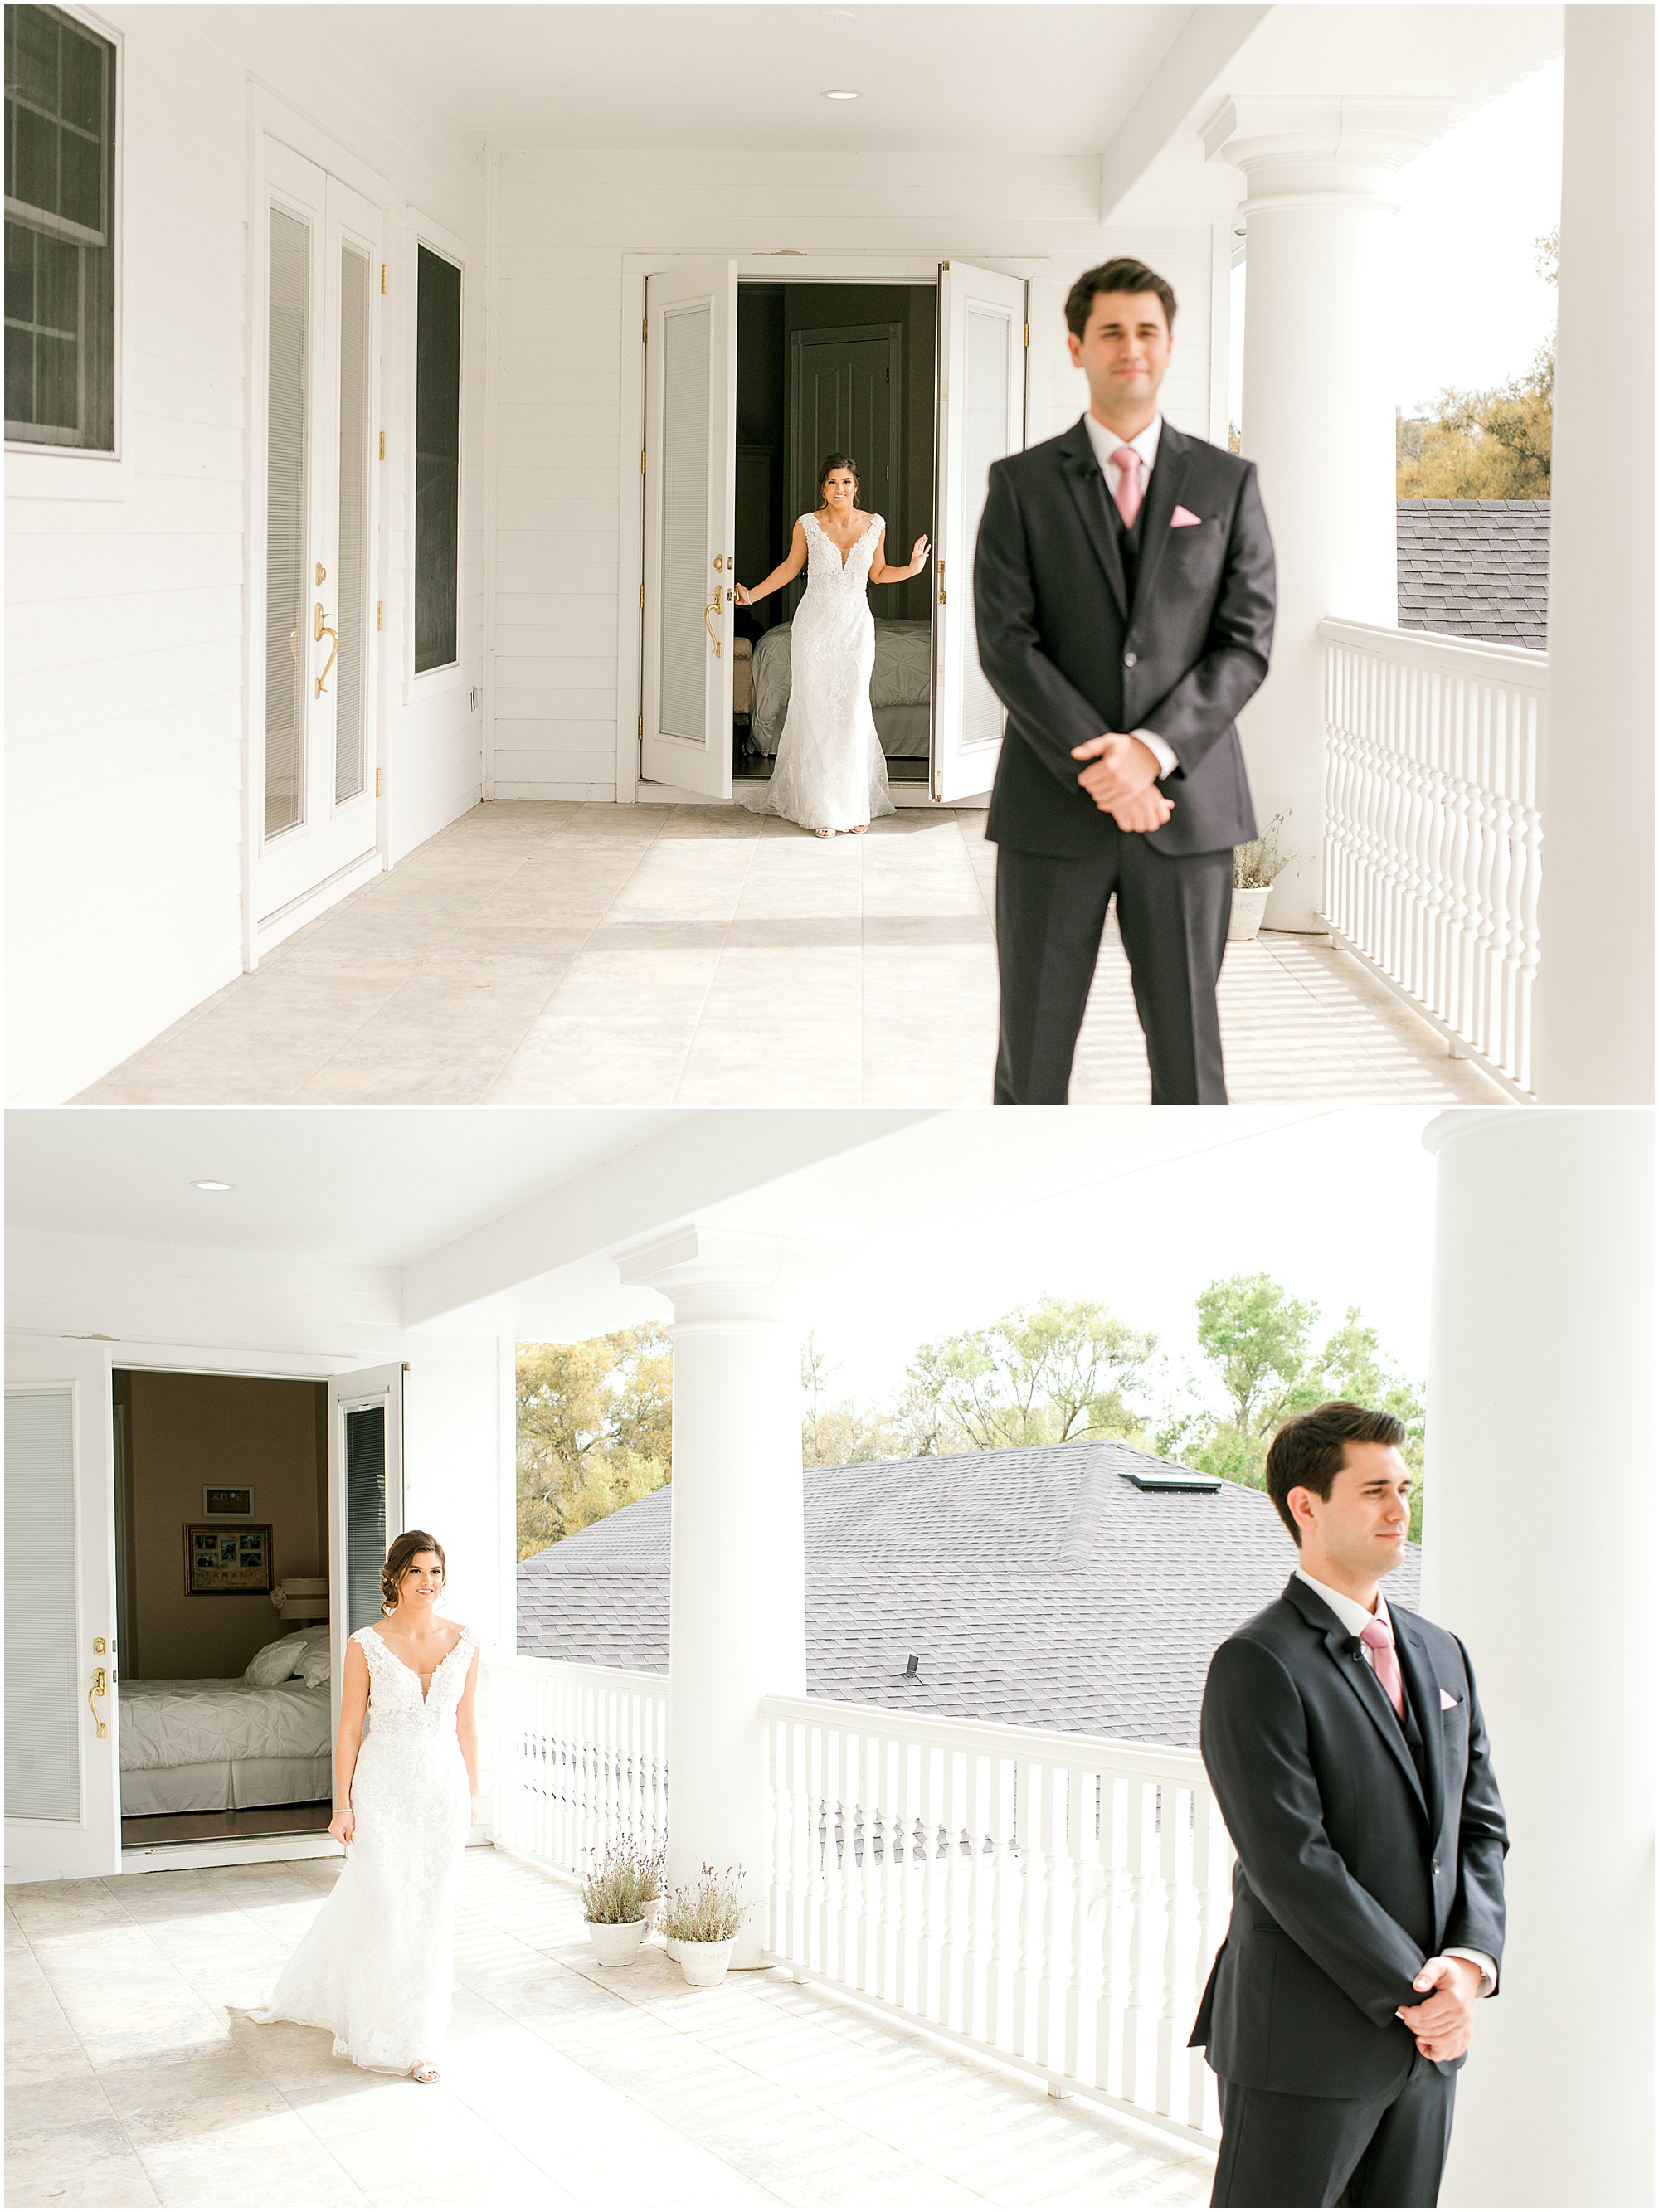 Groom waiting to see the bride for the first time at southern wedding